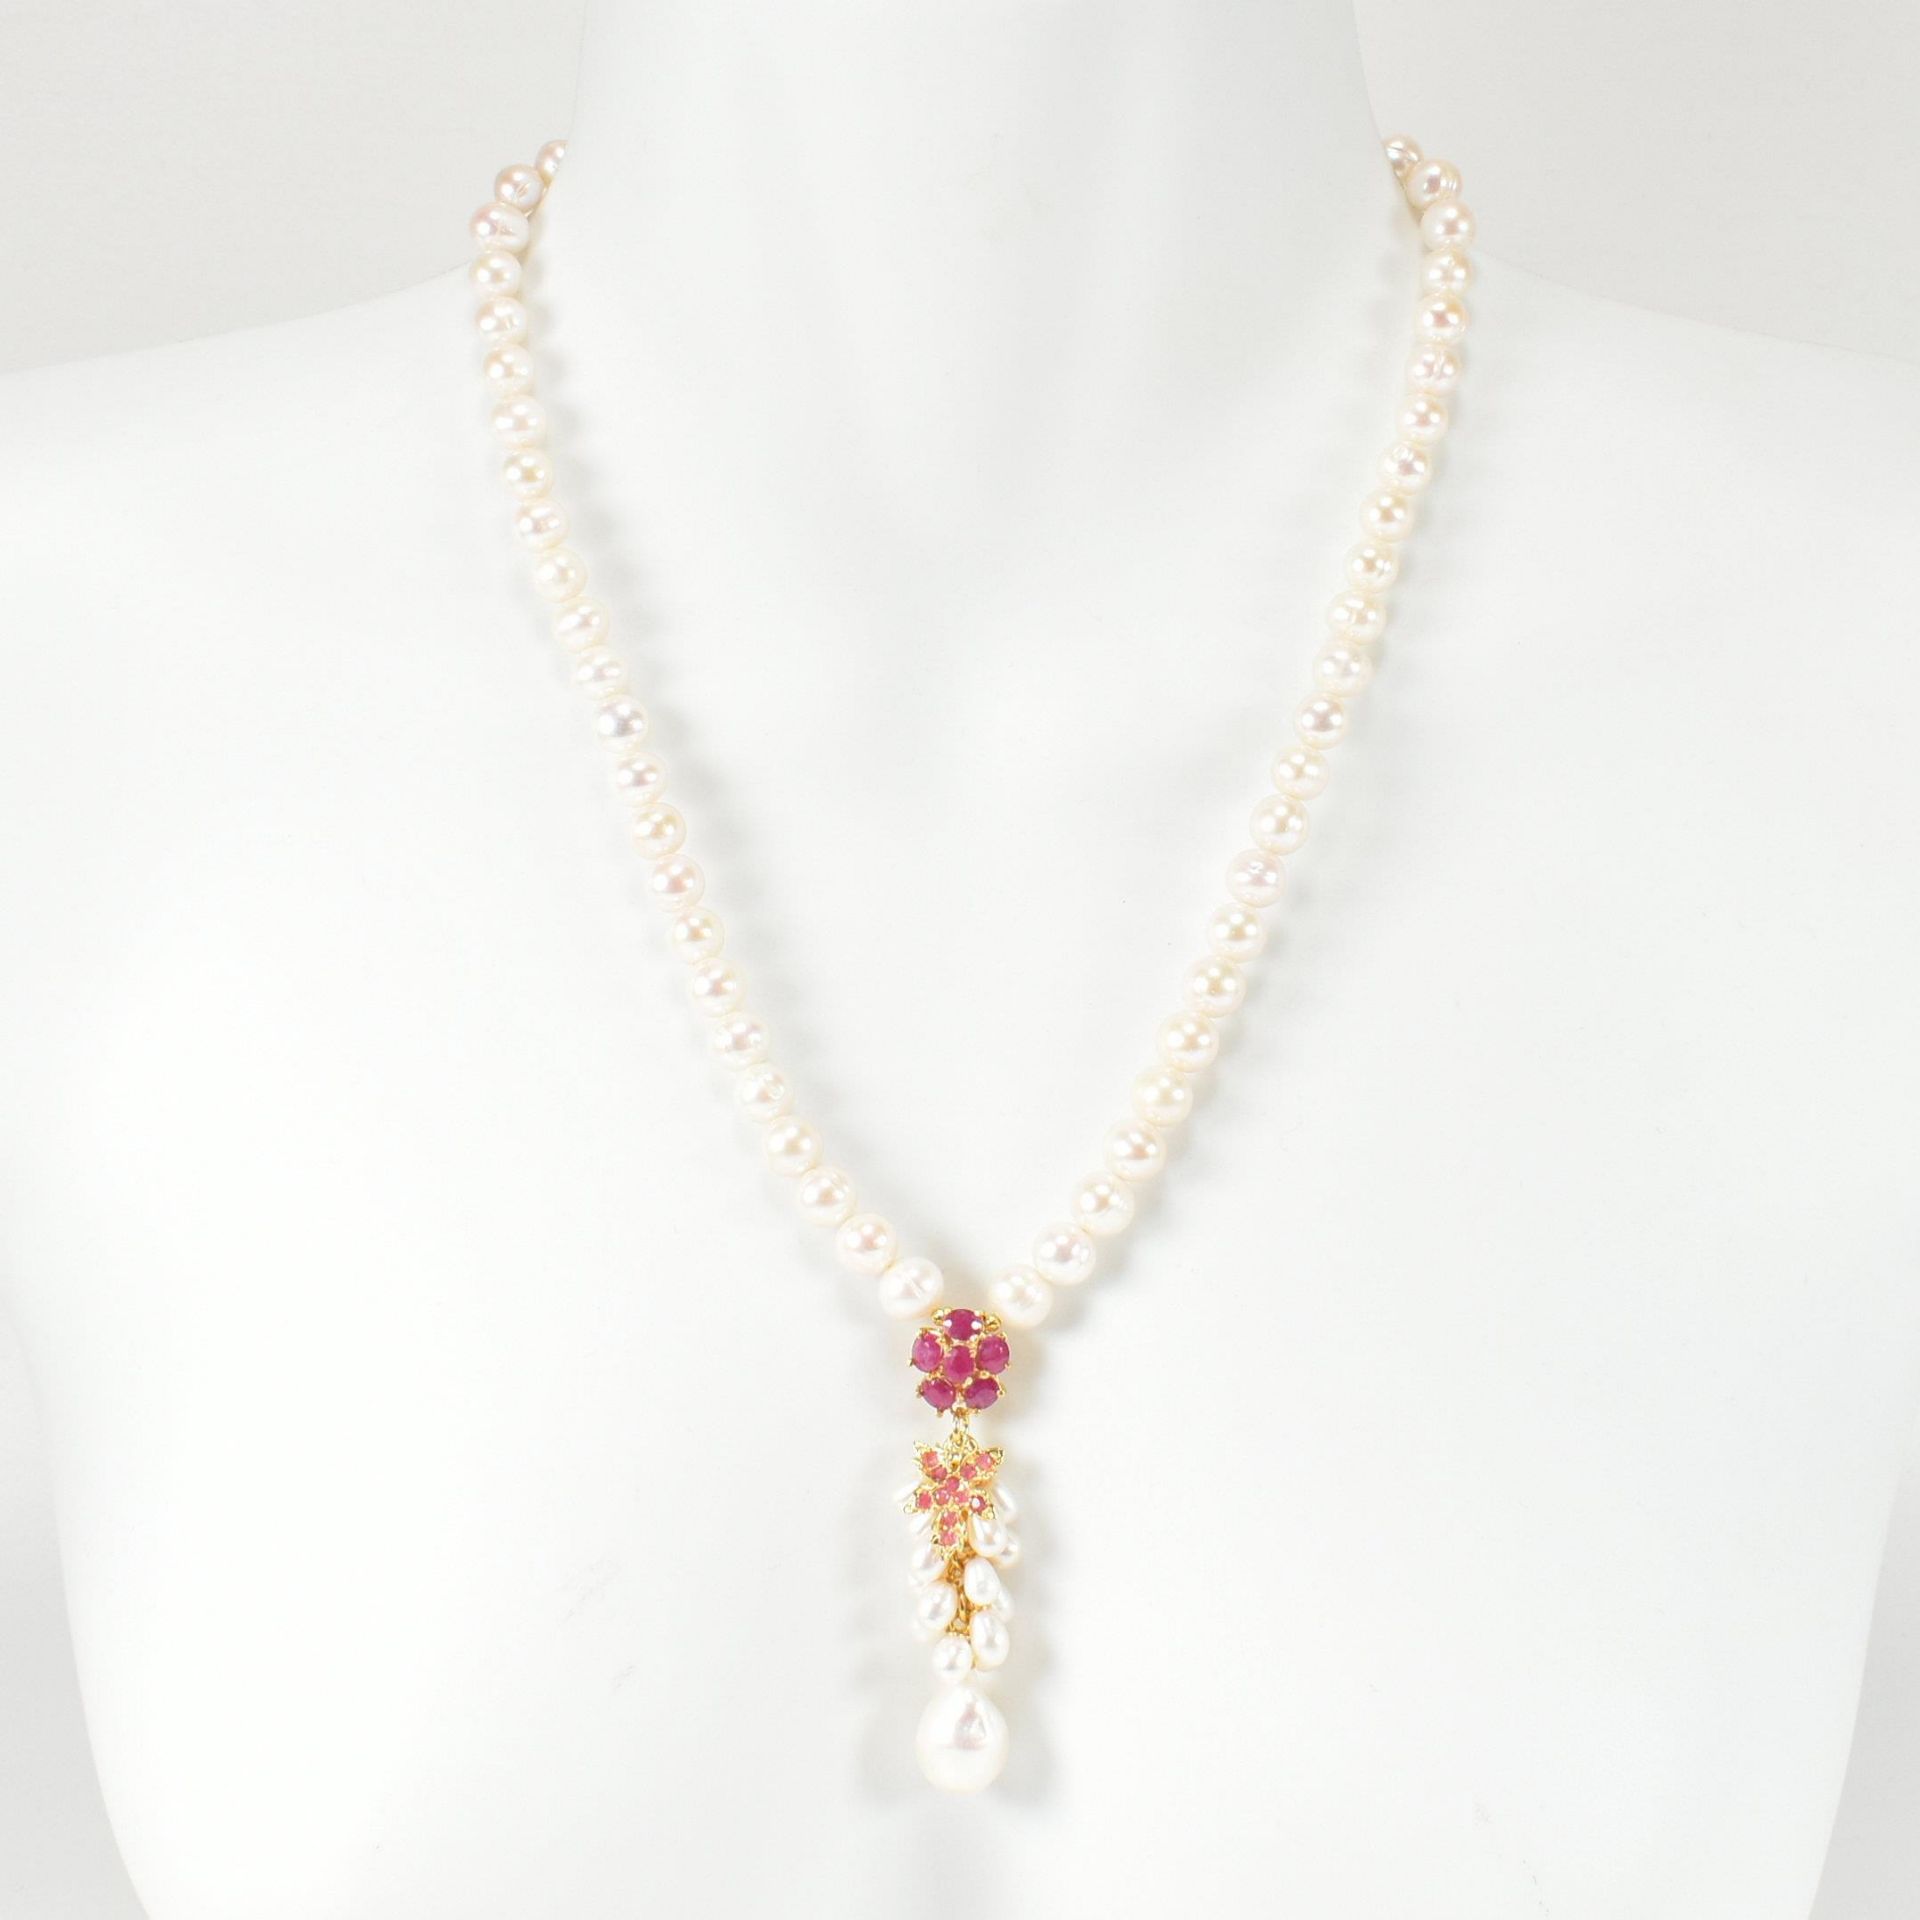 FRESHWATER PEARL & RUBY DROP PENDANT NECKLACE - Image 6 of 7